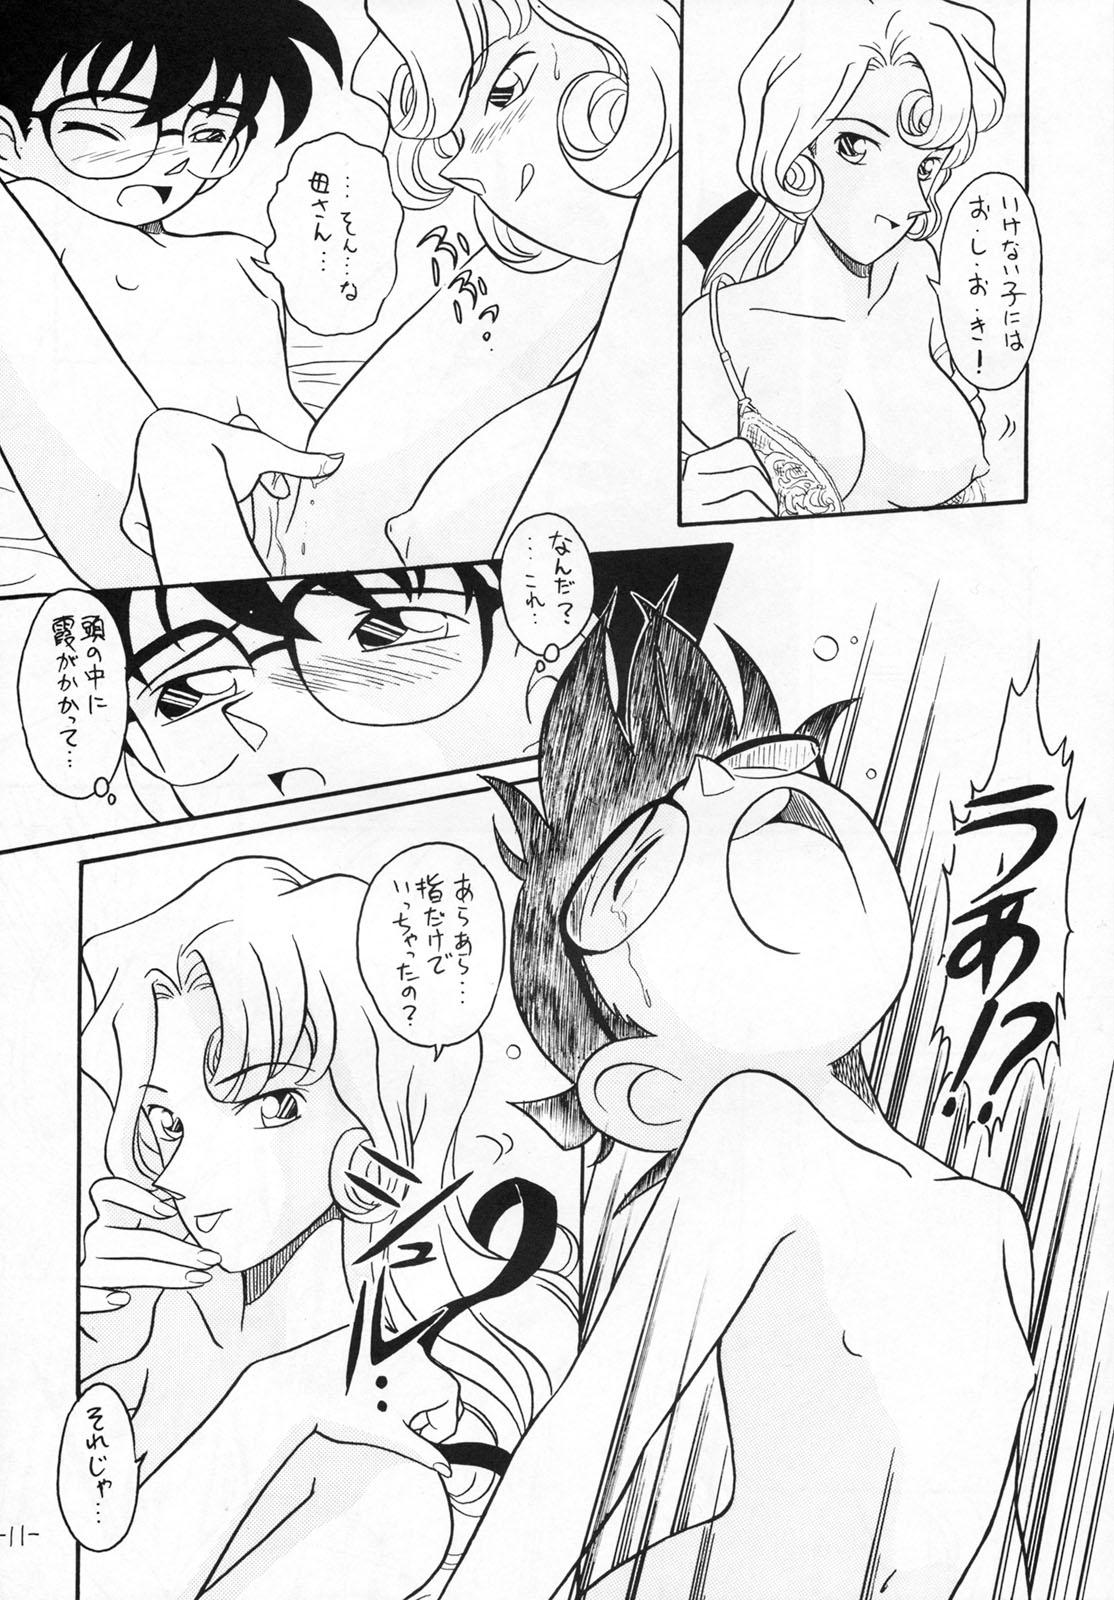 Bigcock OUT SIDE 9 - Detective conan Kitchen - Page 10